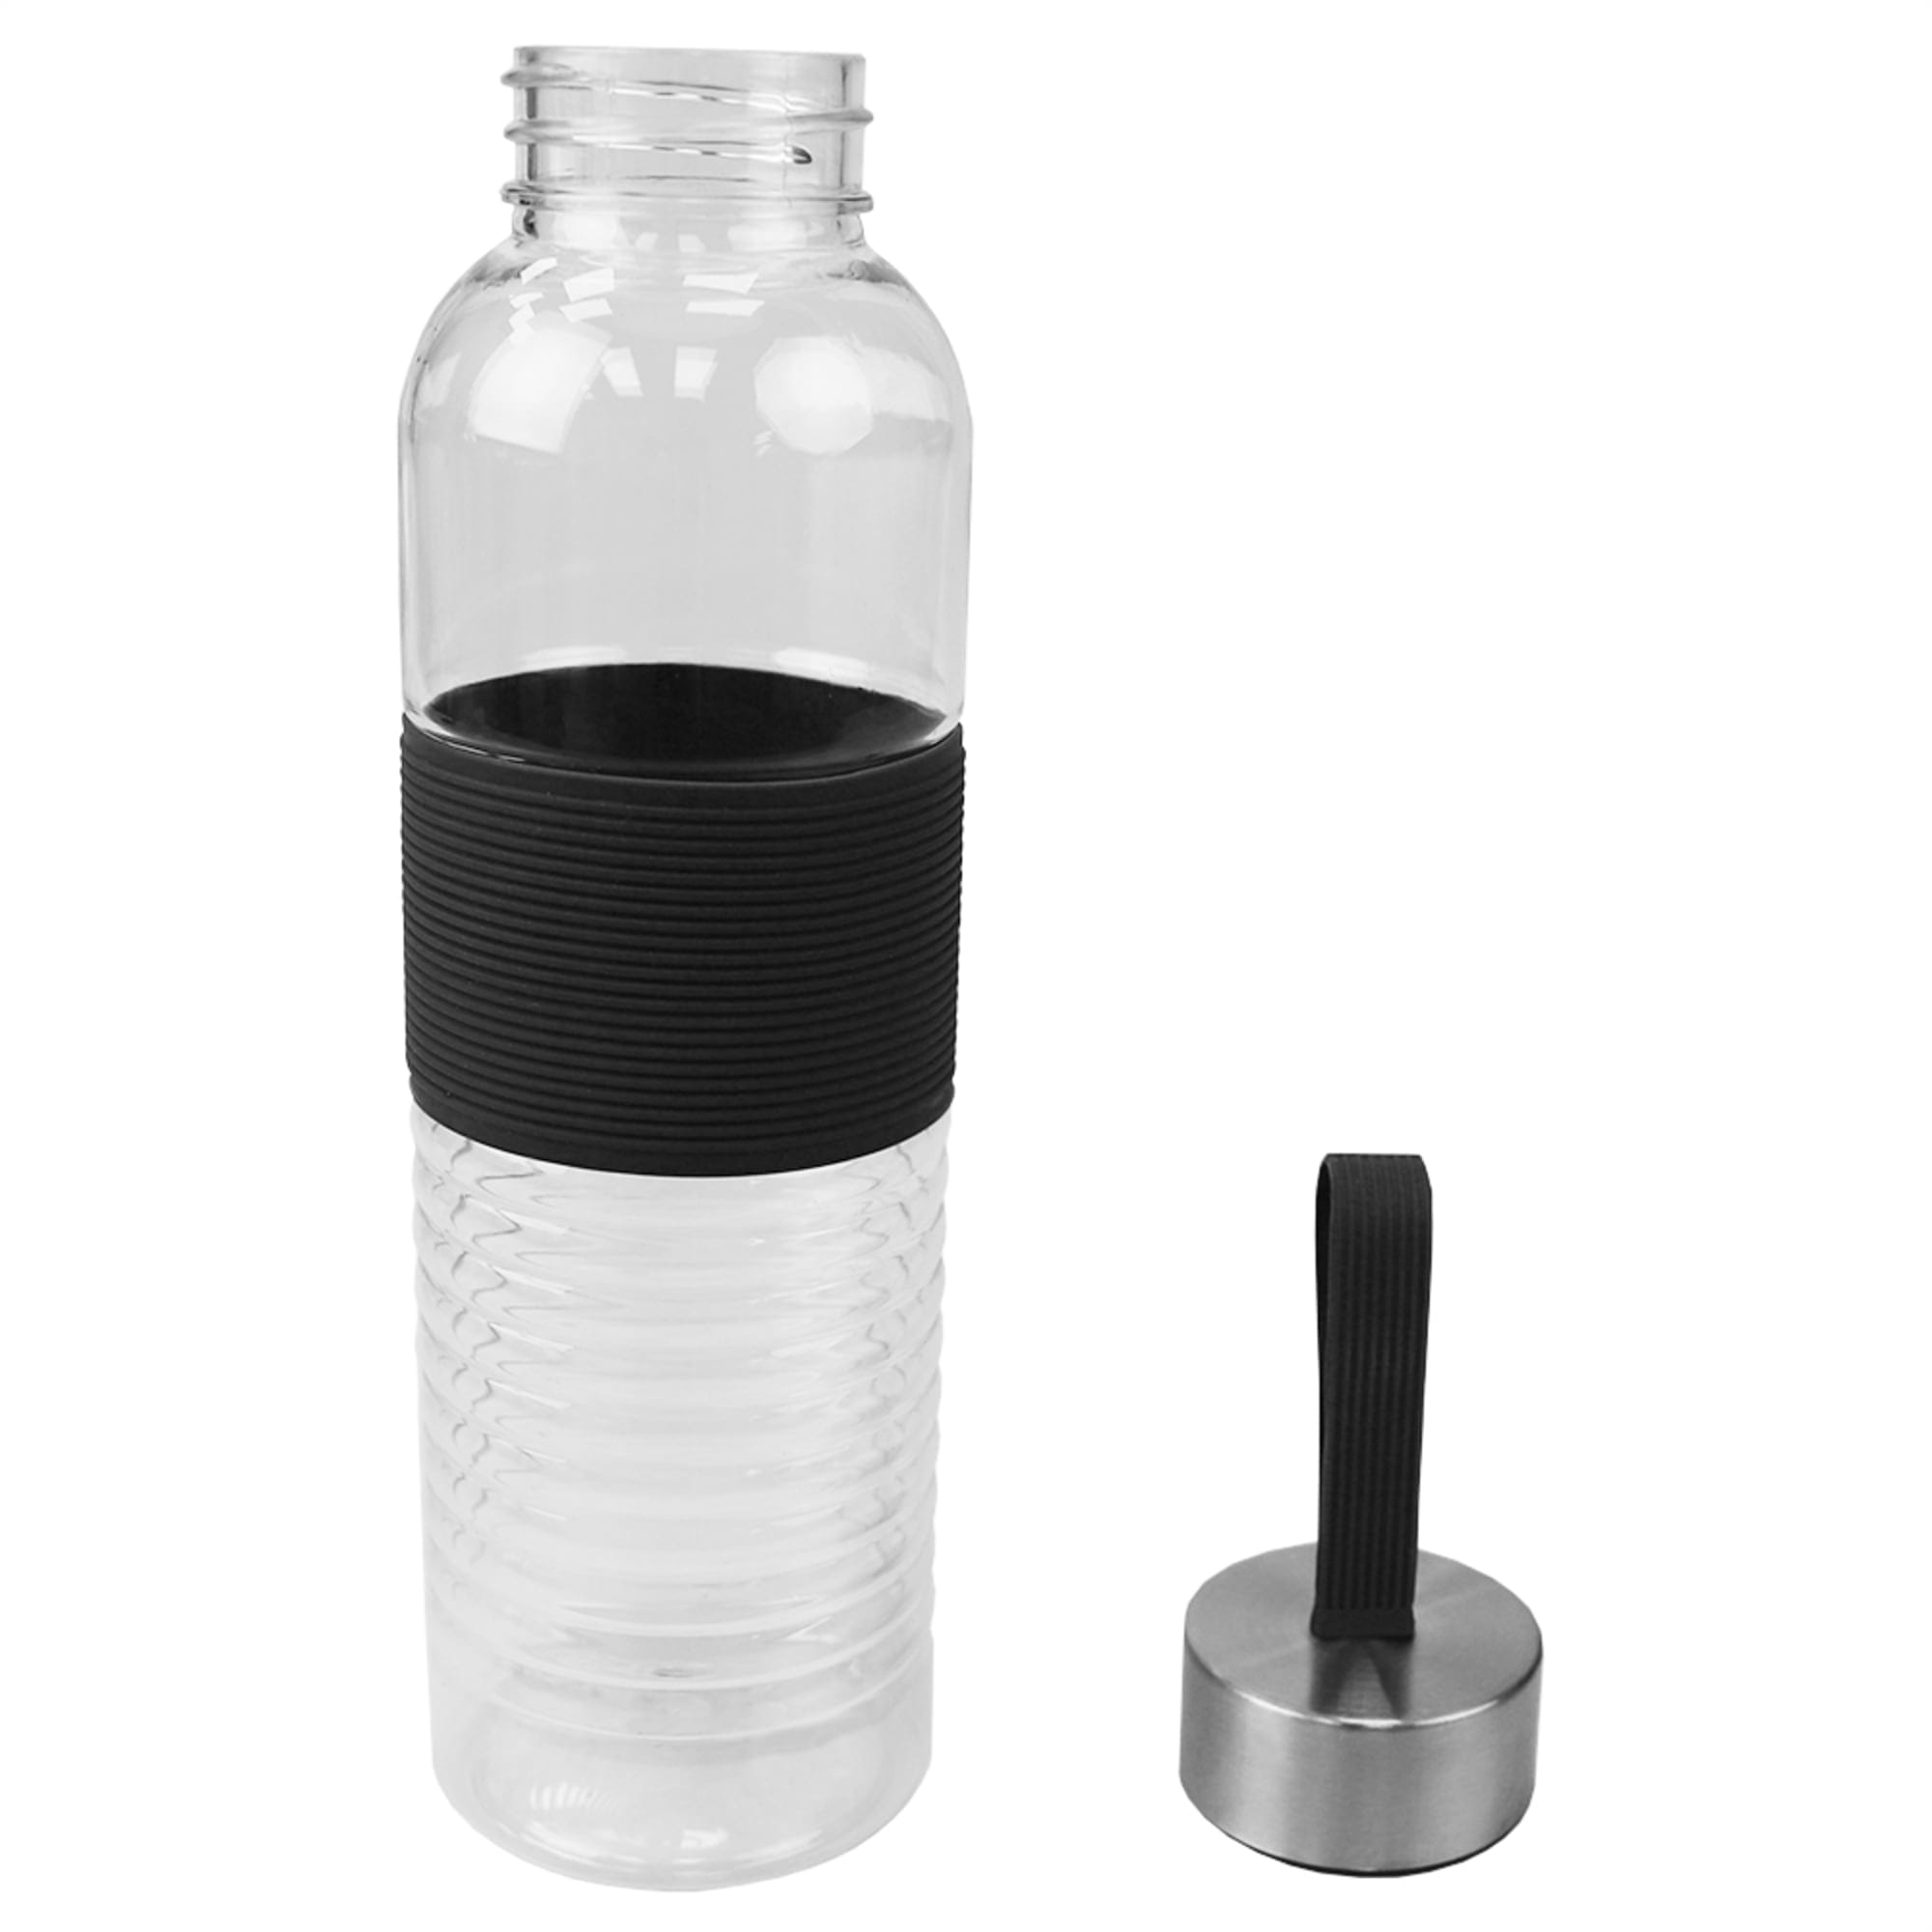 Home Basics 20 Oz. Plastic Travel Bottle with Built-in Carrying Strap and Textured Grip $4.00 EACH, CASE PACK OF 12